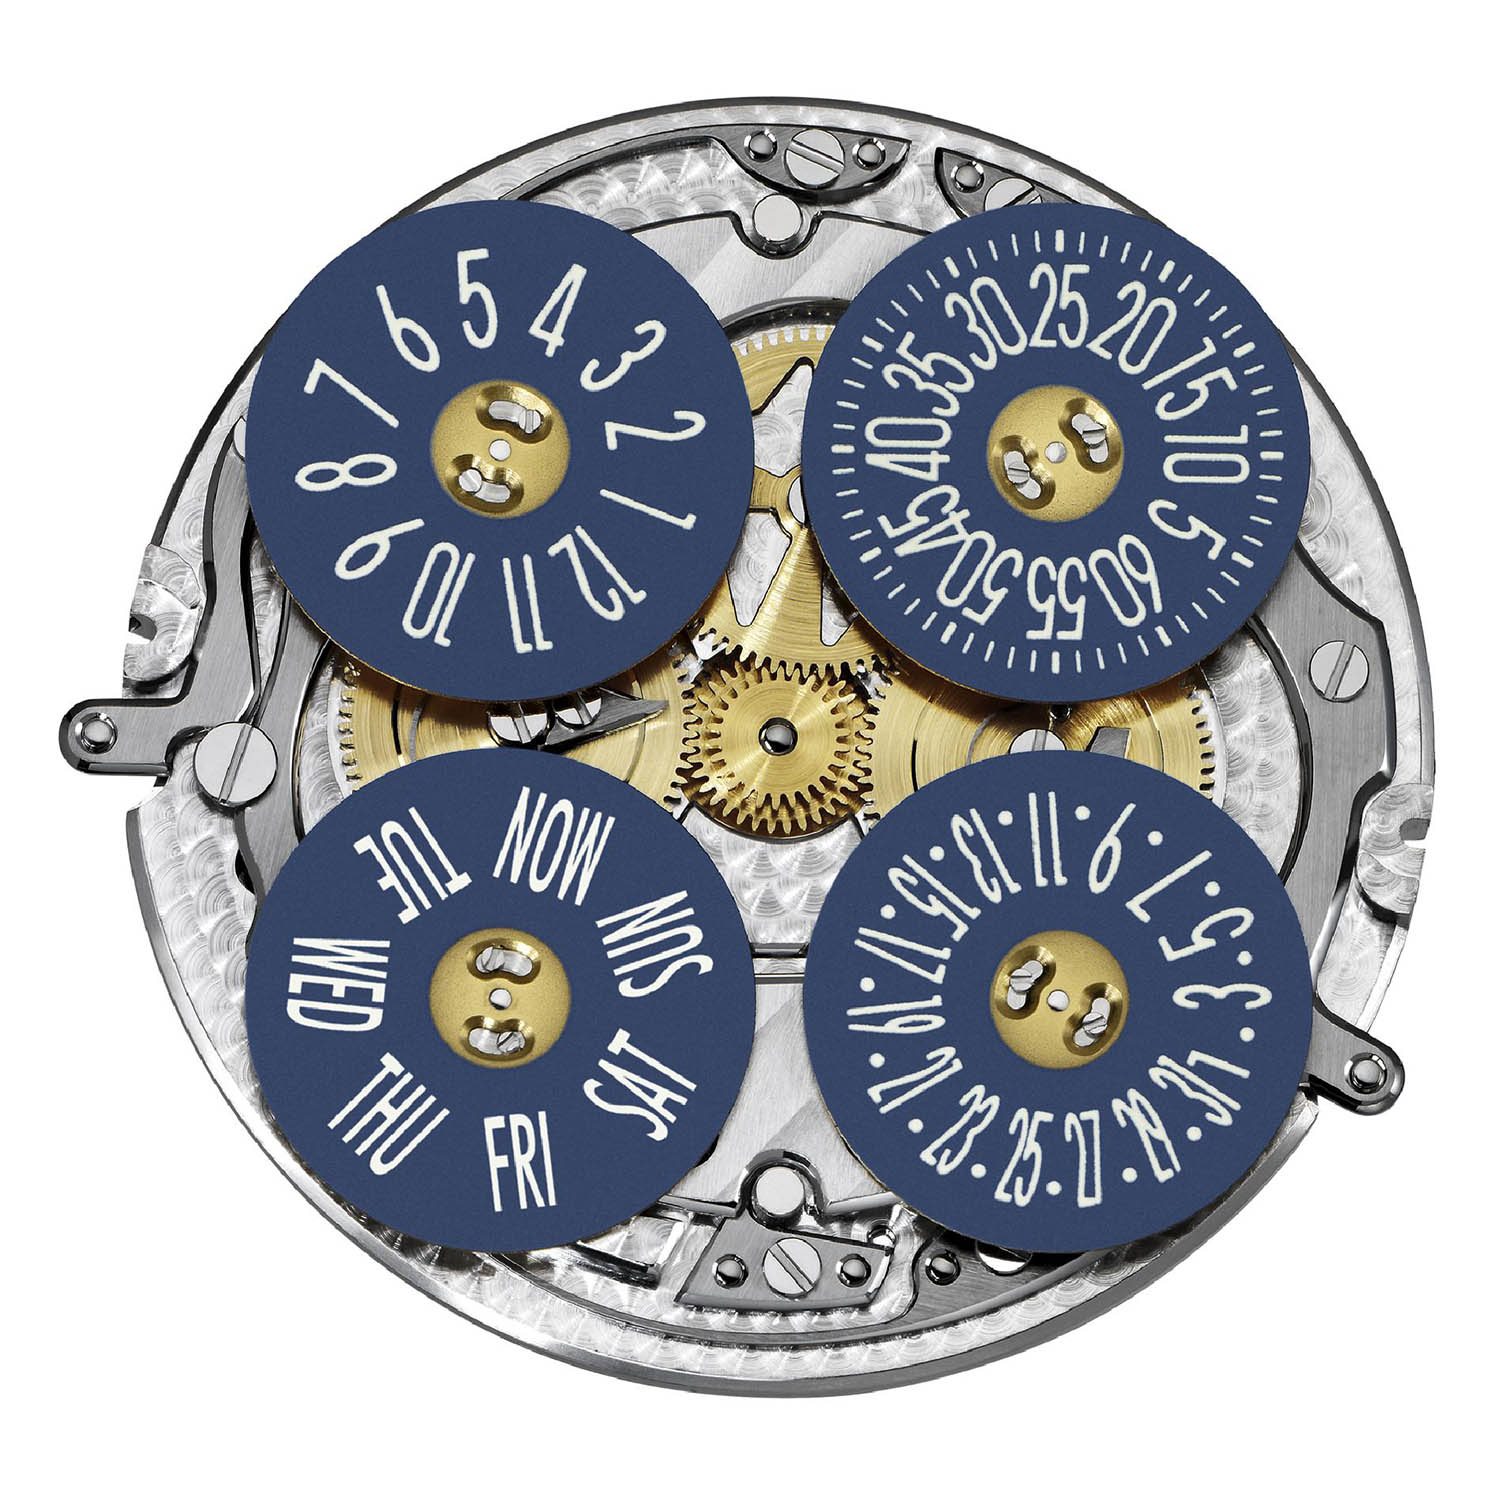 Vacheron Constantin Metiers dâ€™Art The legend of the Chinese zodiac - Year of the tiger - 3